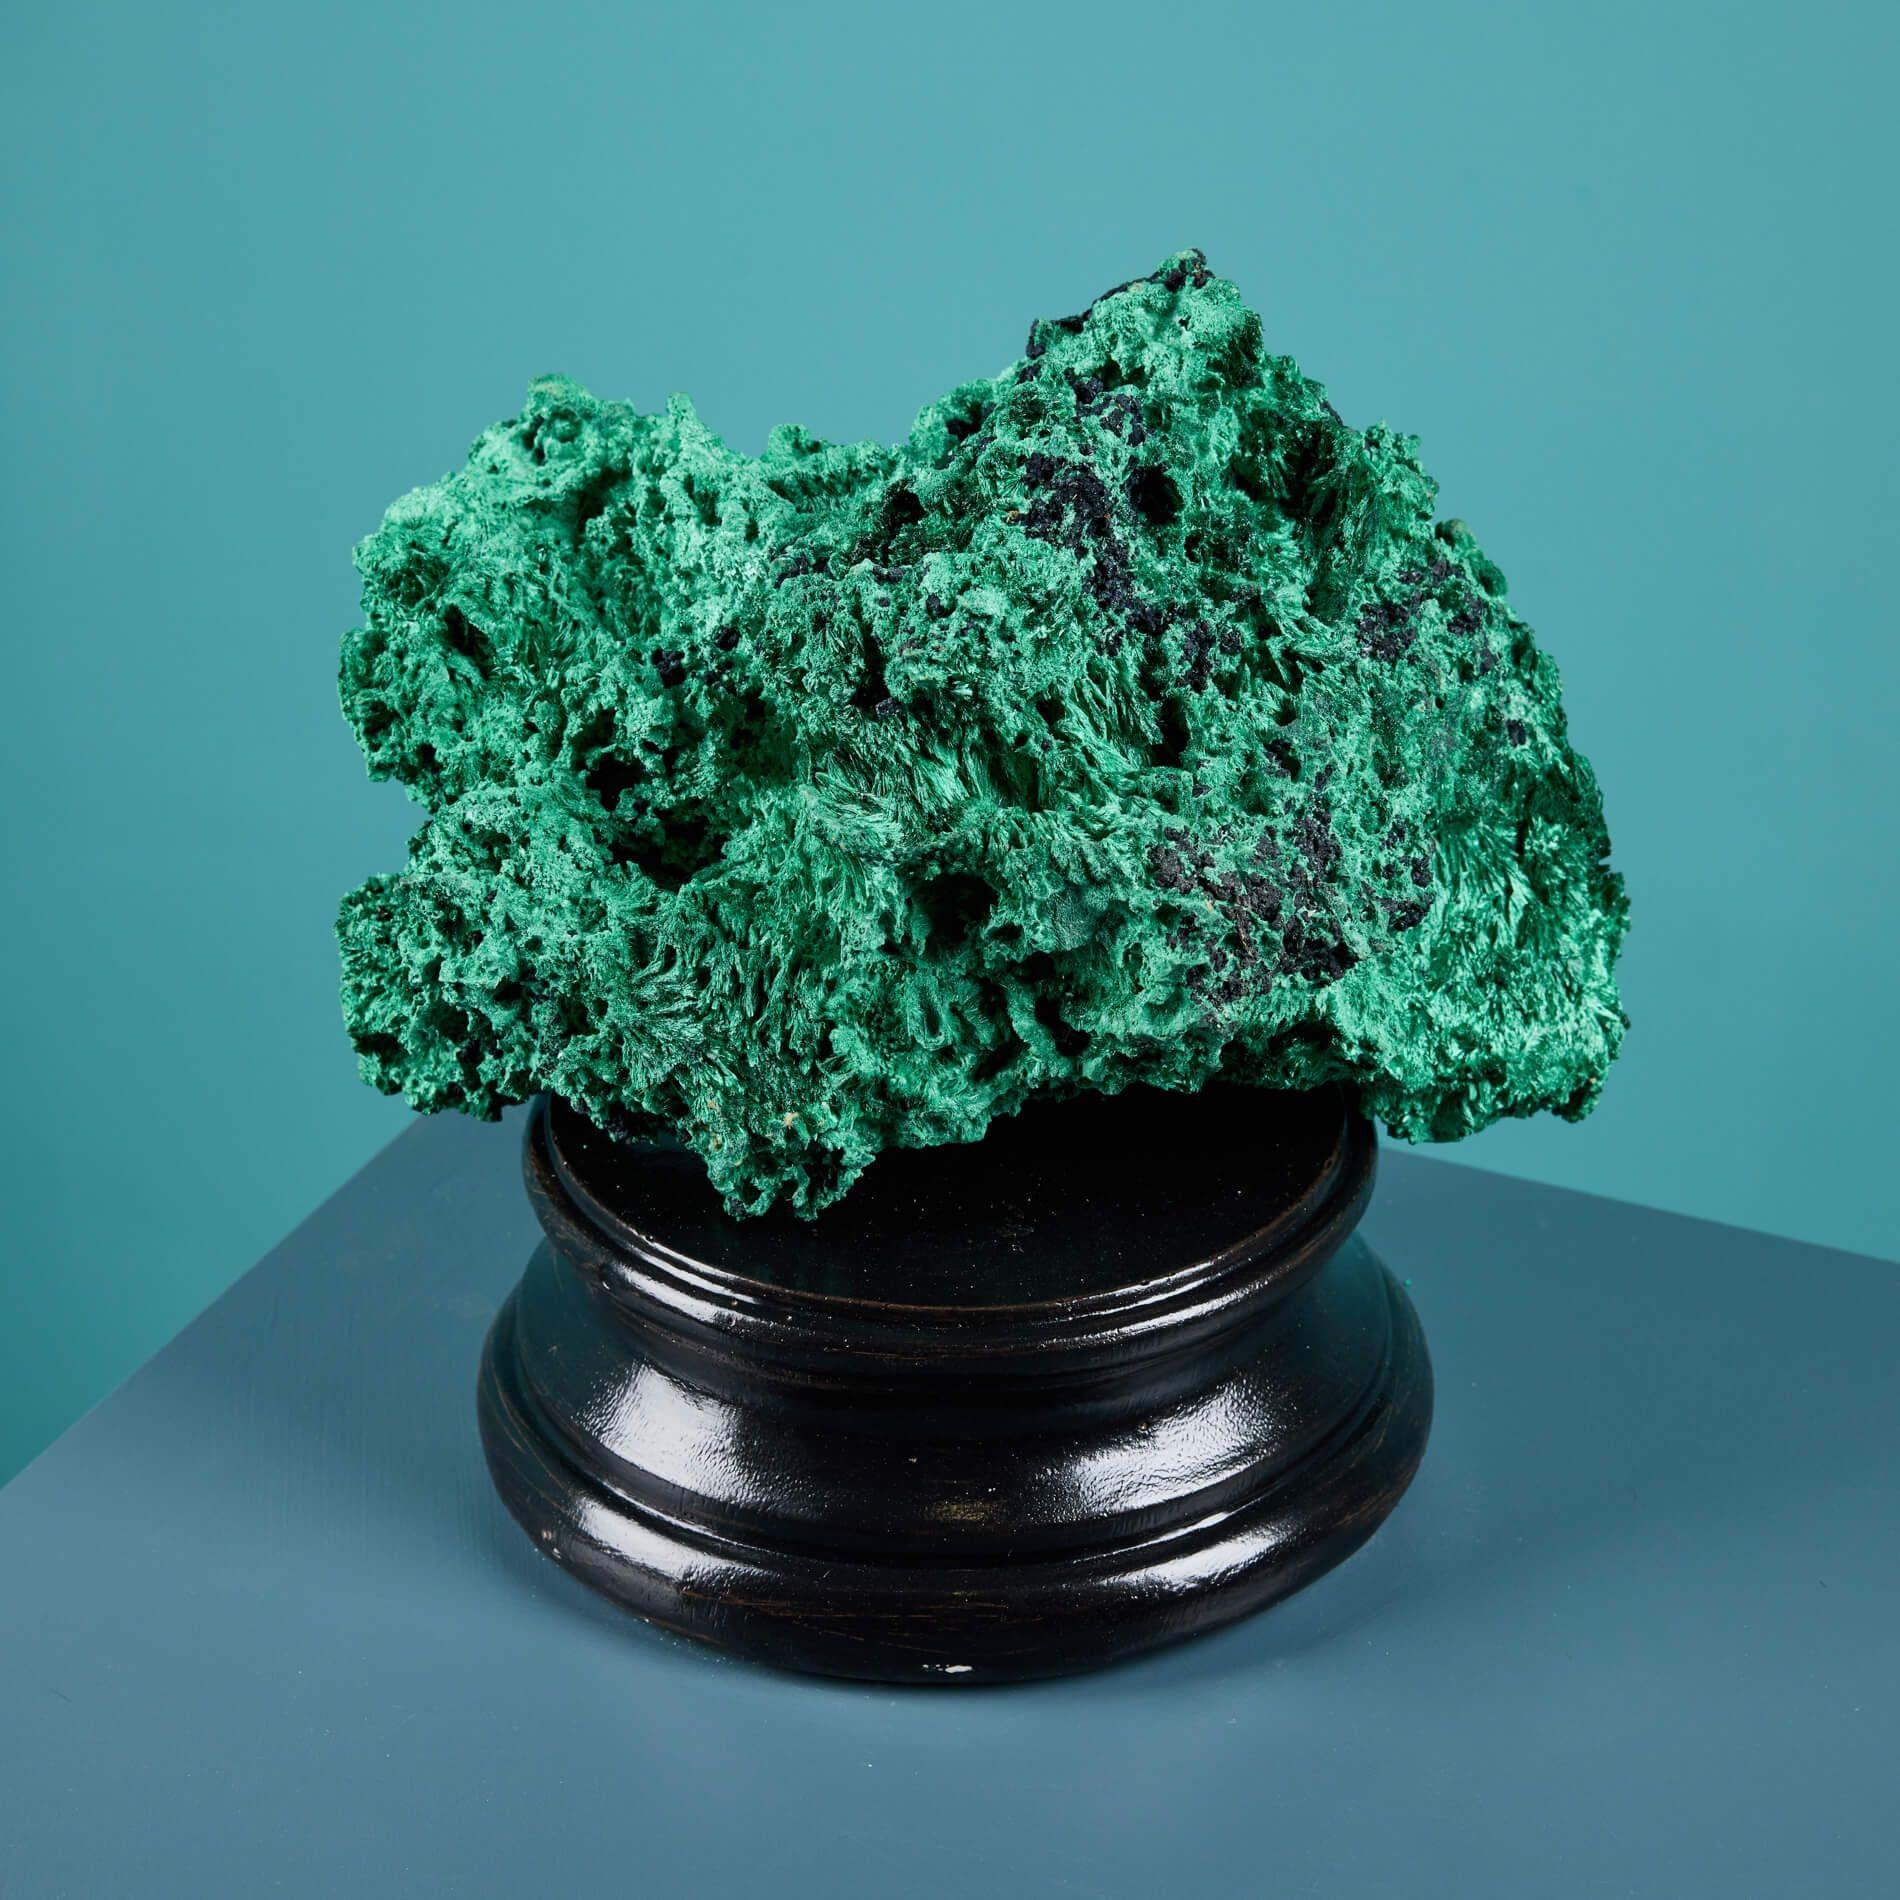 Congolese Large Natural Silky or Fibrous Malachite Specimen For Sale